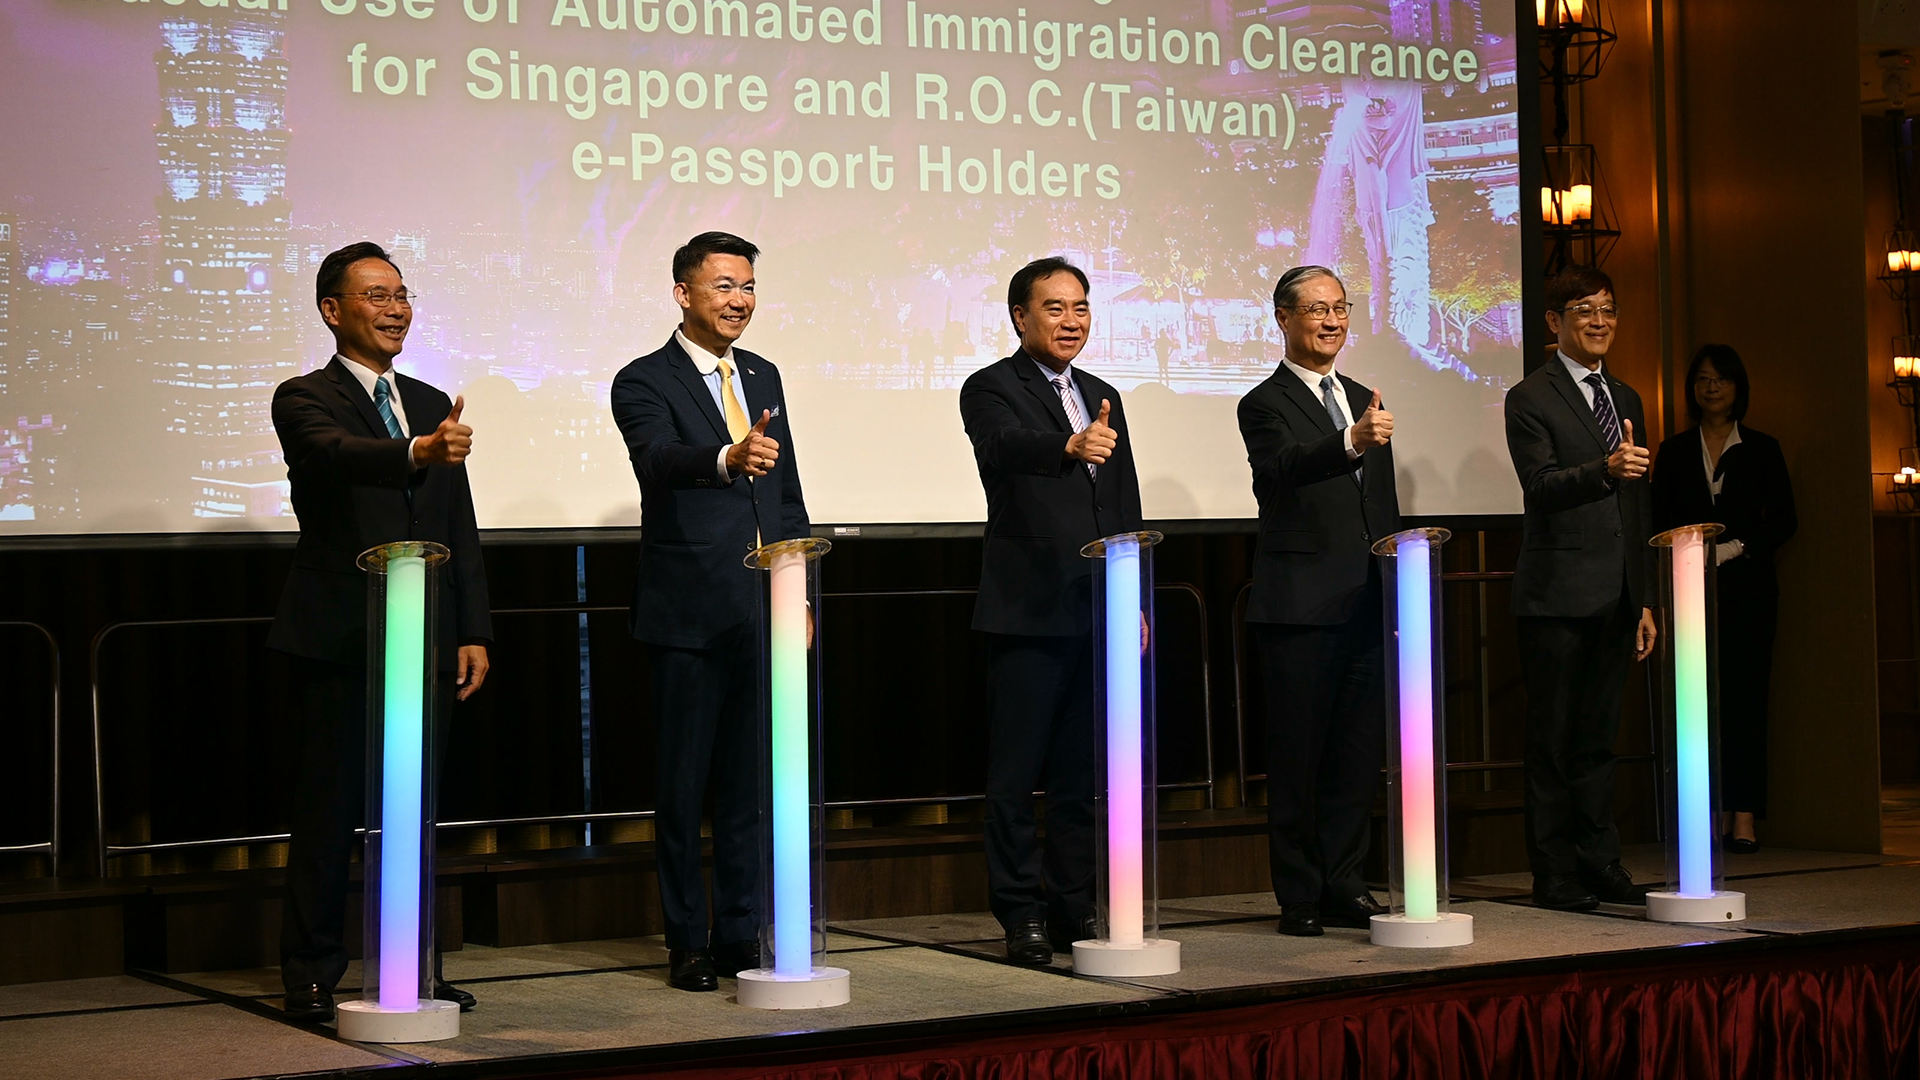 Reciprocal computerized immigration clearance will begin between Taiwan and Singapore. Photo provided by National Immigration Agency (NIA)